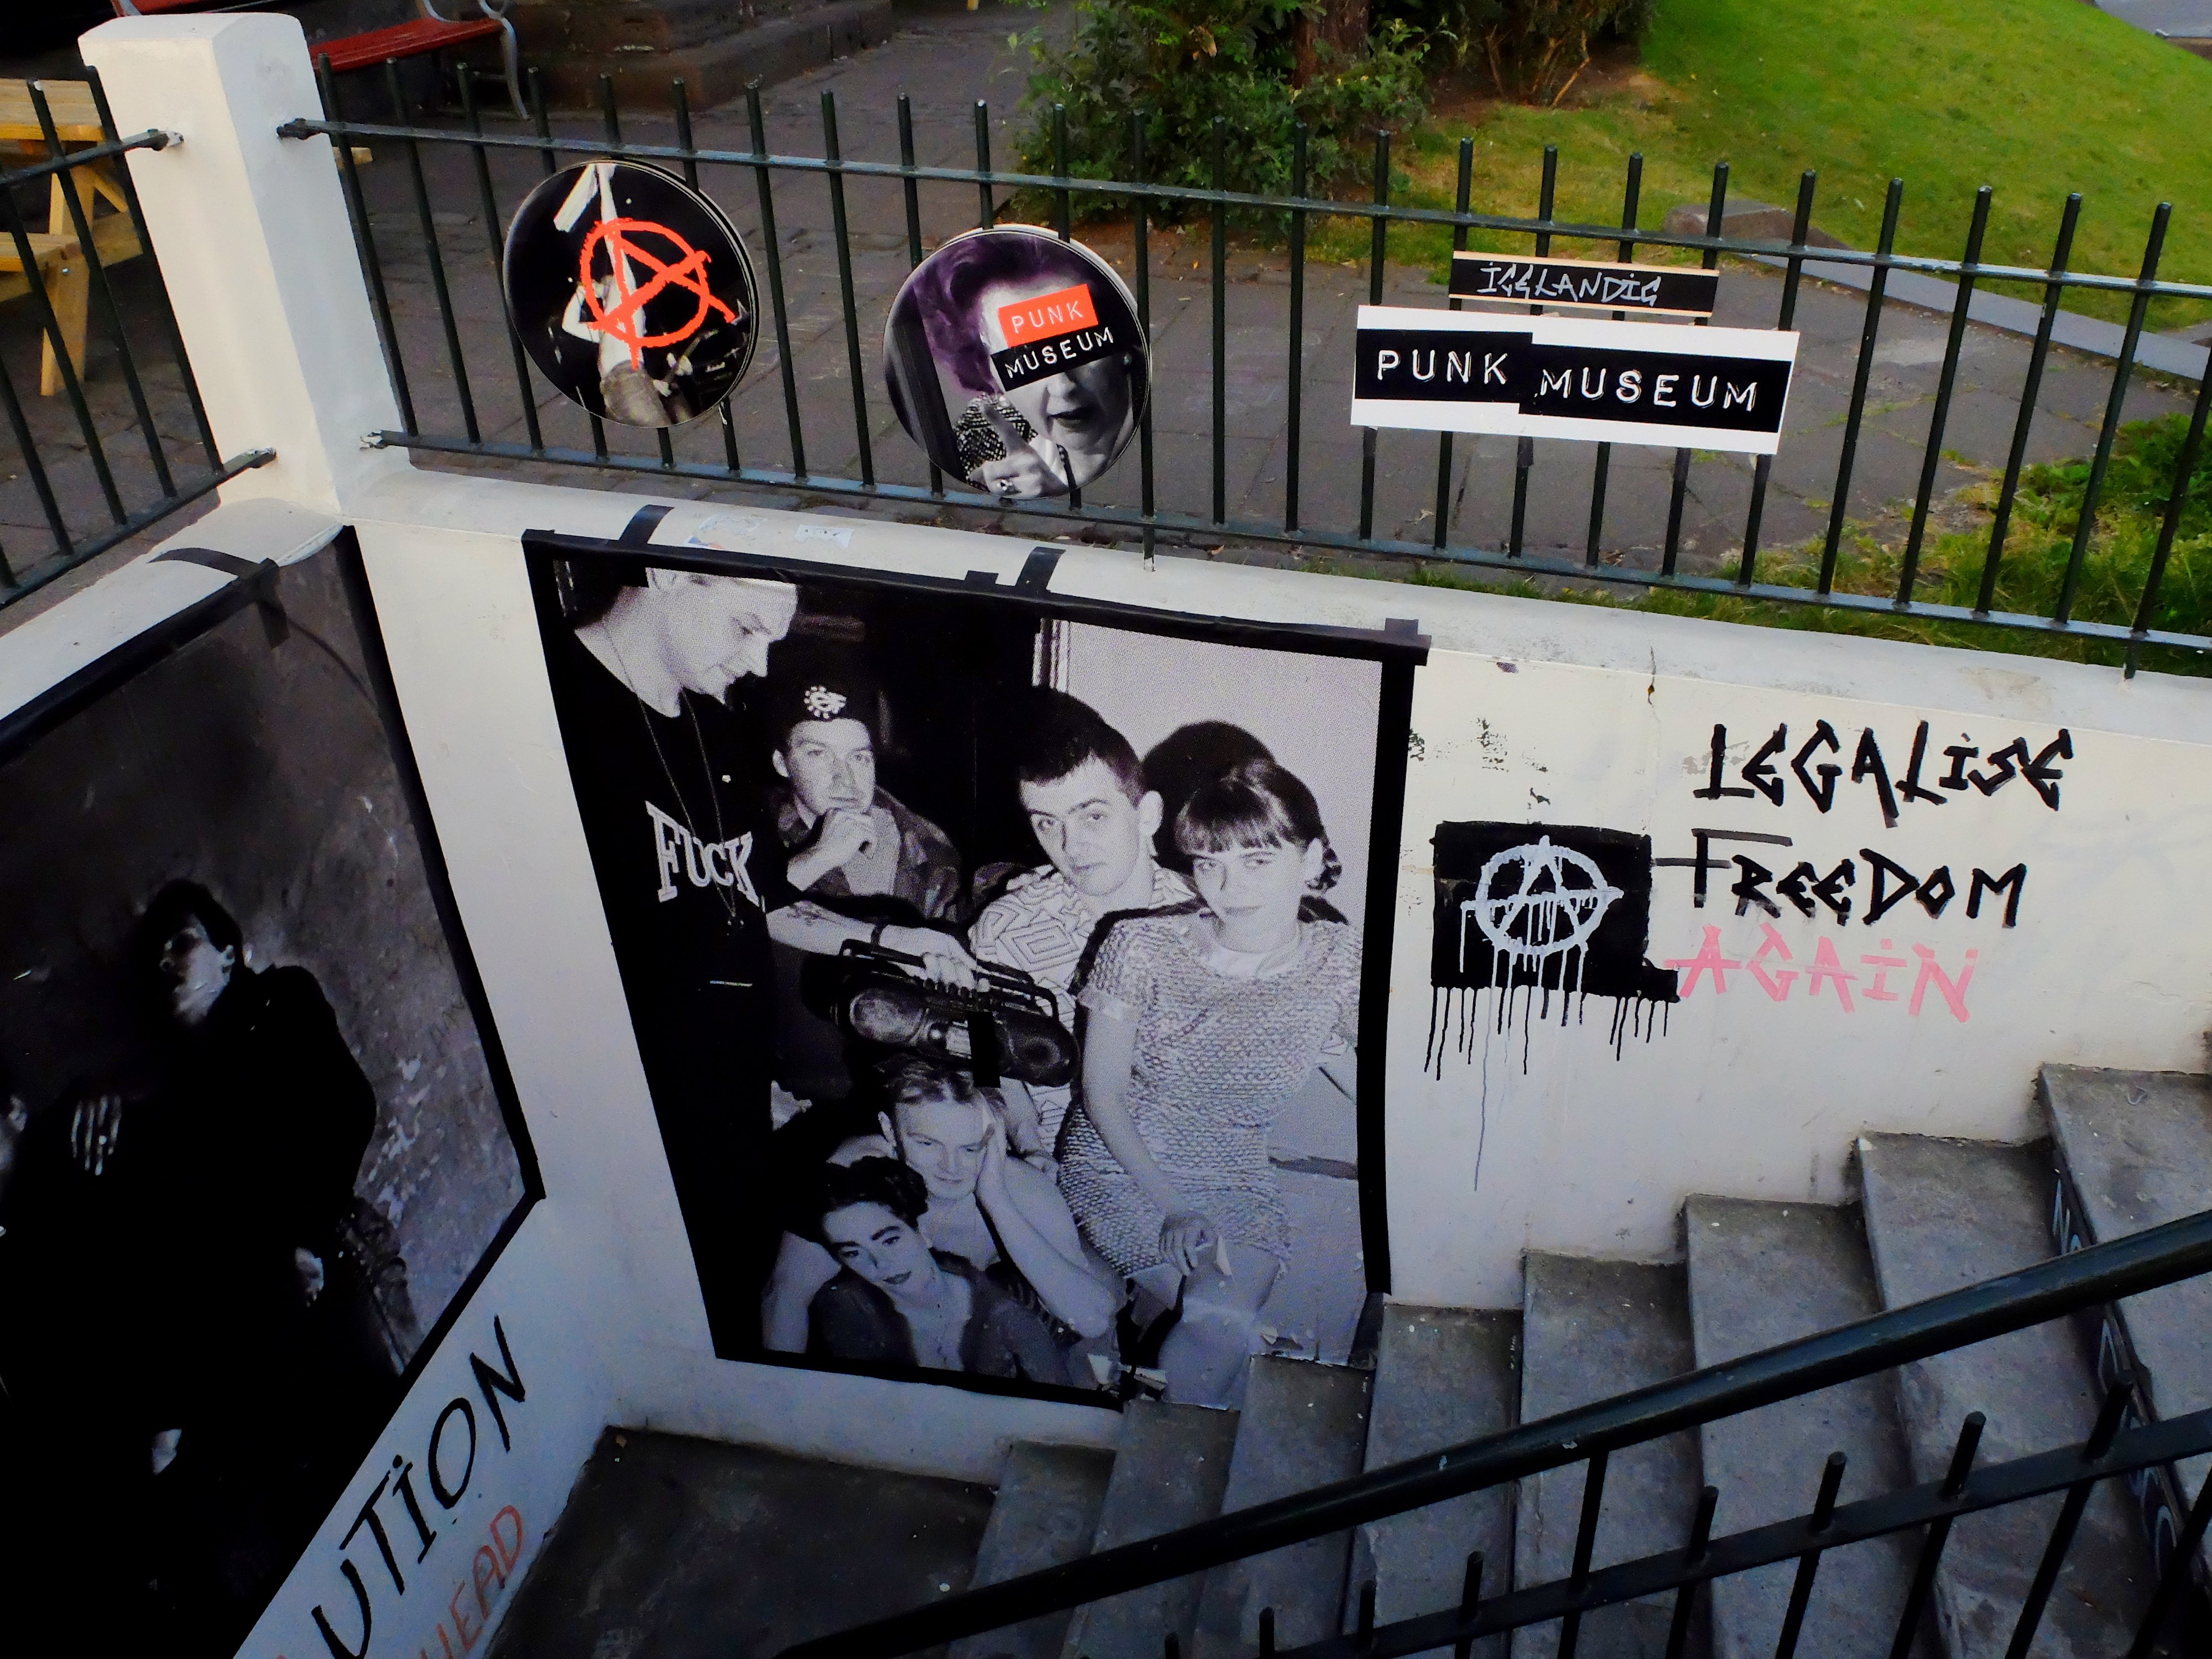 Former public toilet is home for a punk museum Museeum